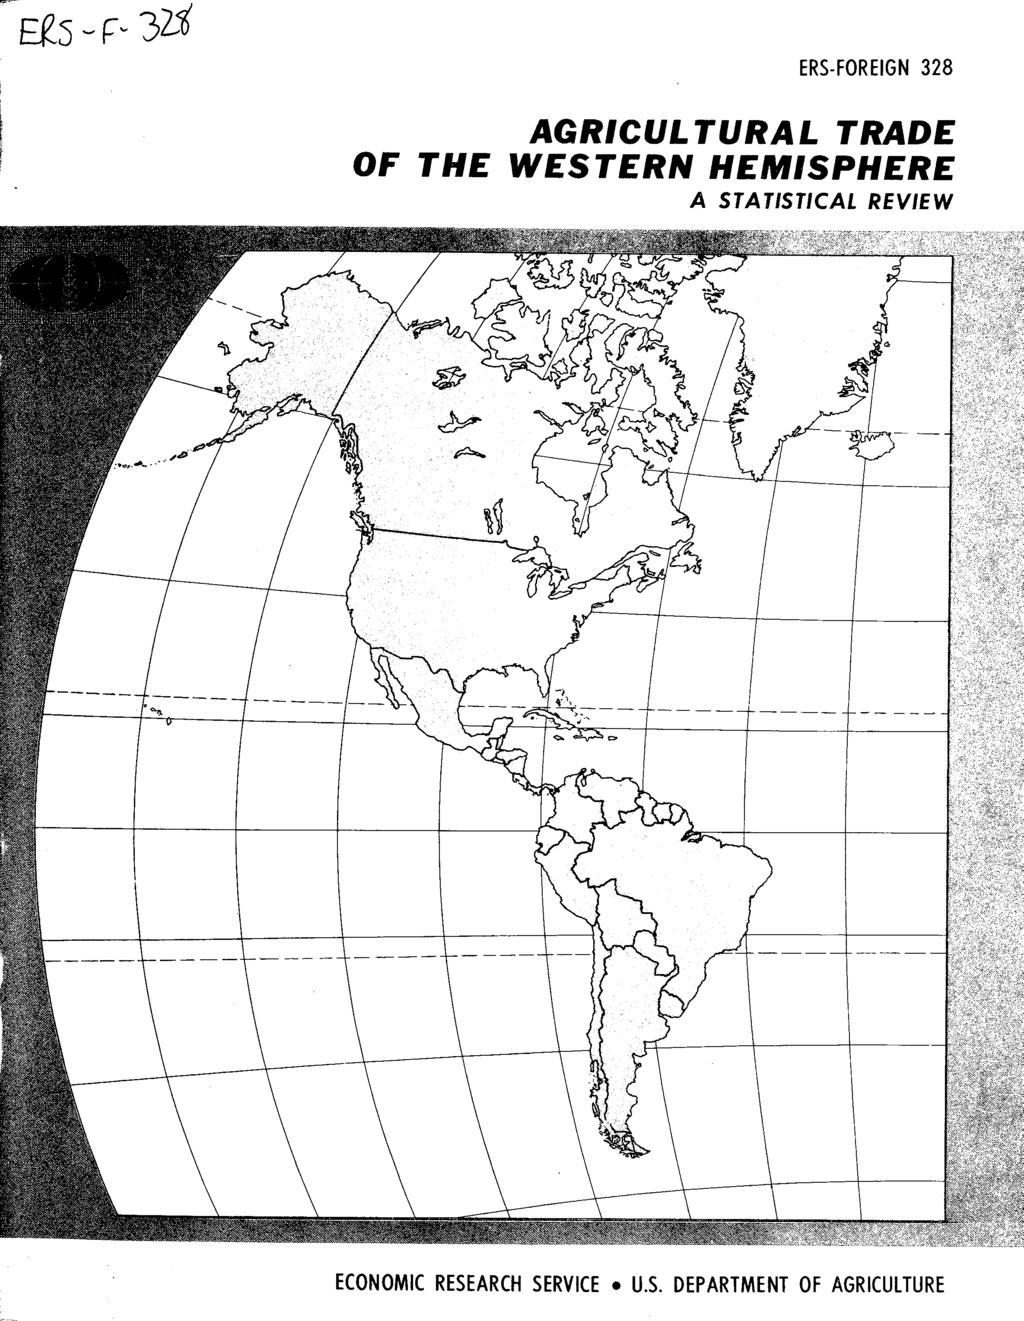 ERS-FOREIGN 328 AGRICULTURAL TRADE OF THE WESTERN HEMISPHERE A